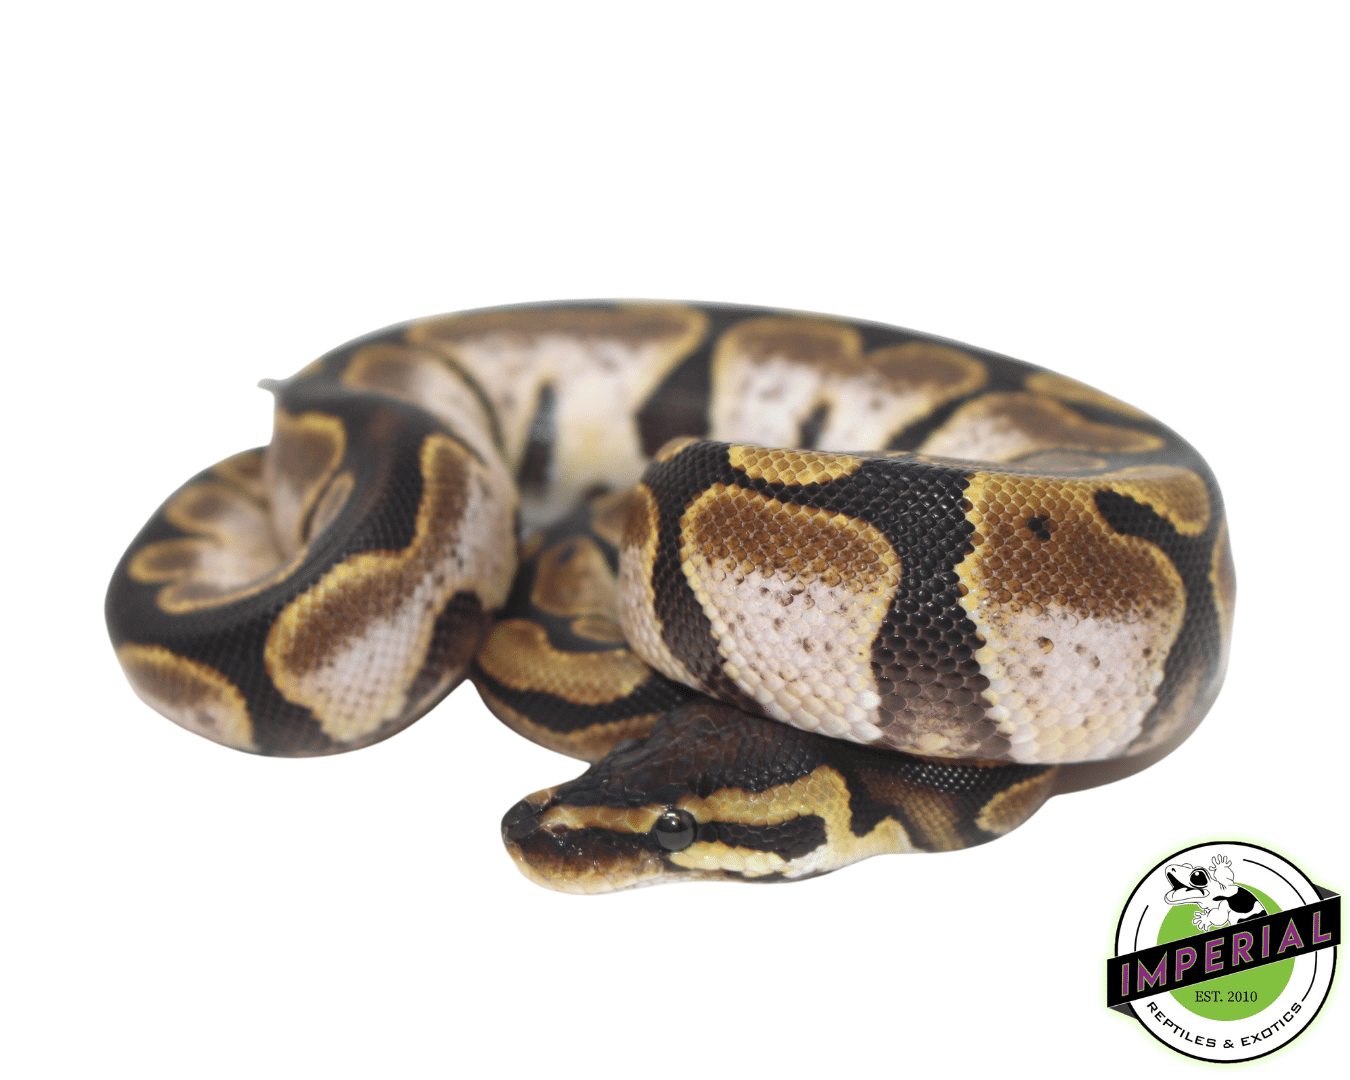 calico ball python for sale, buy reptiles online